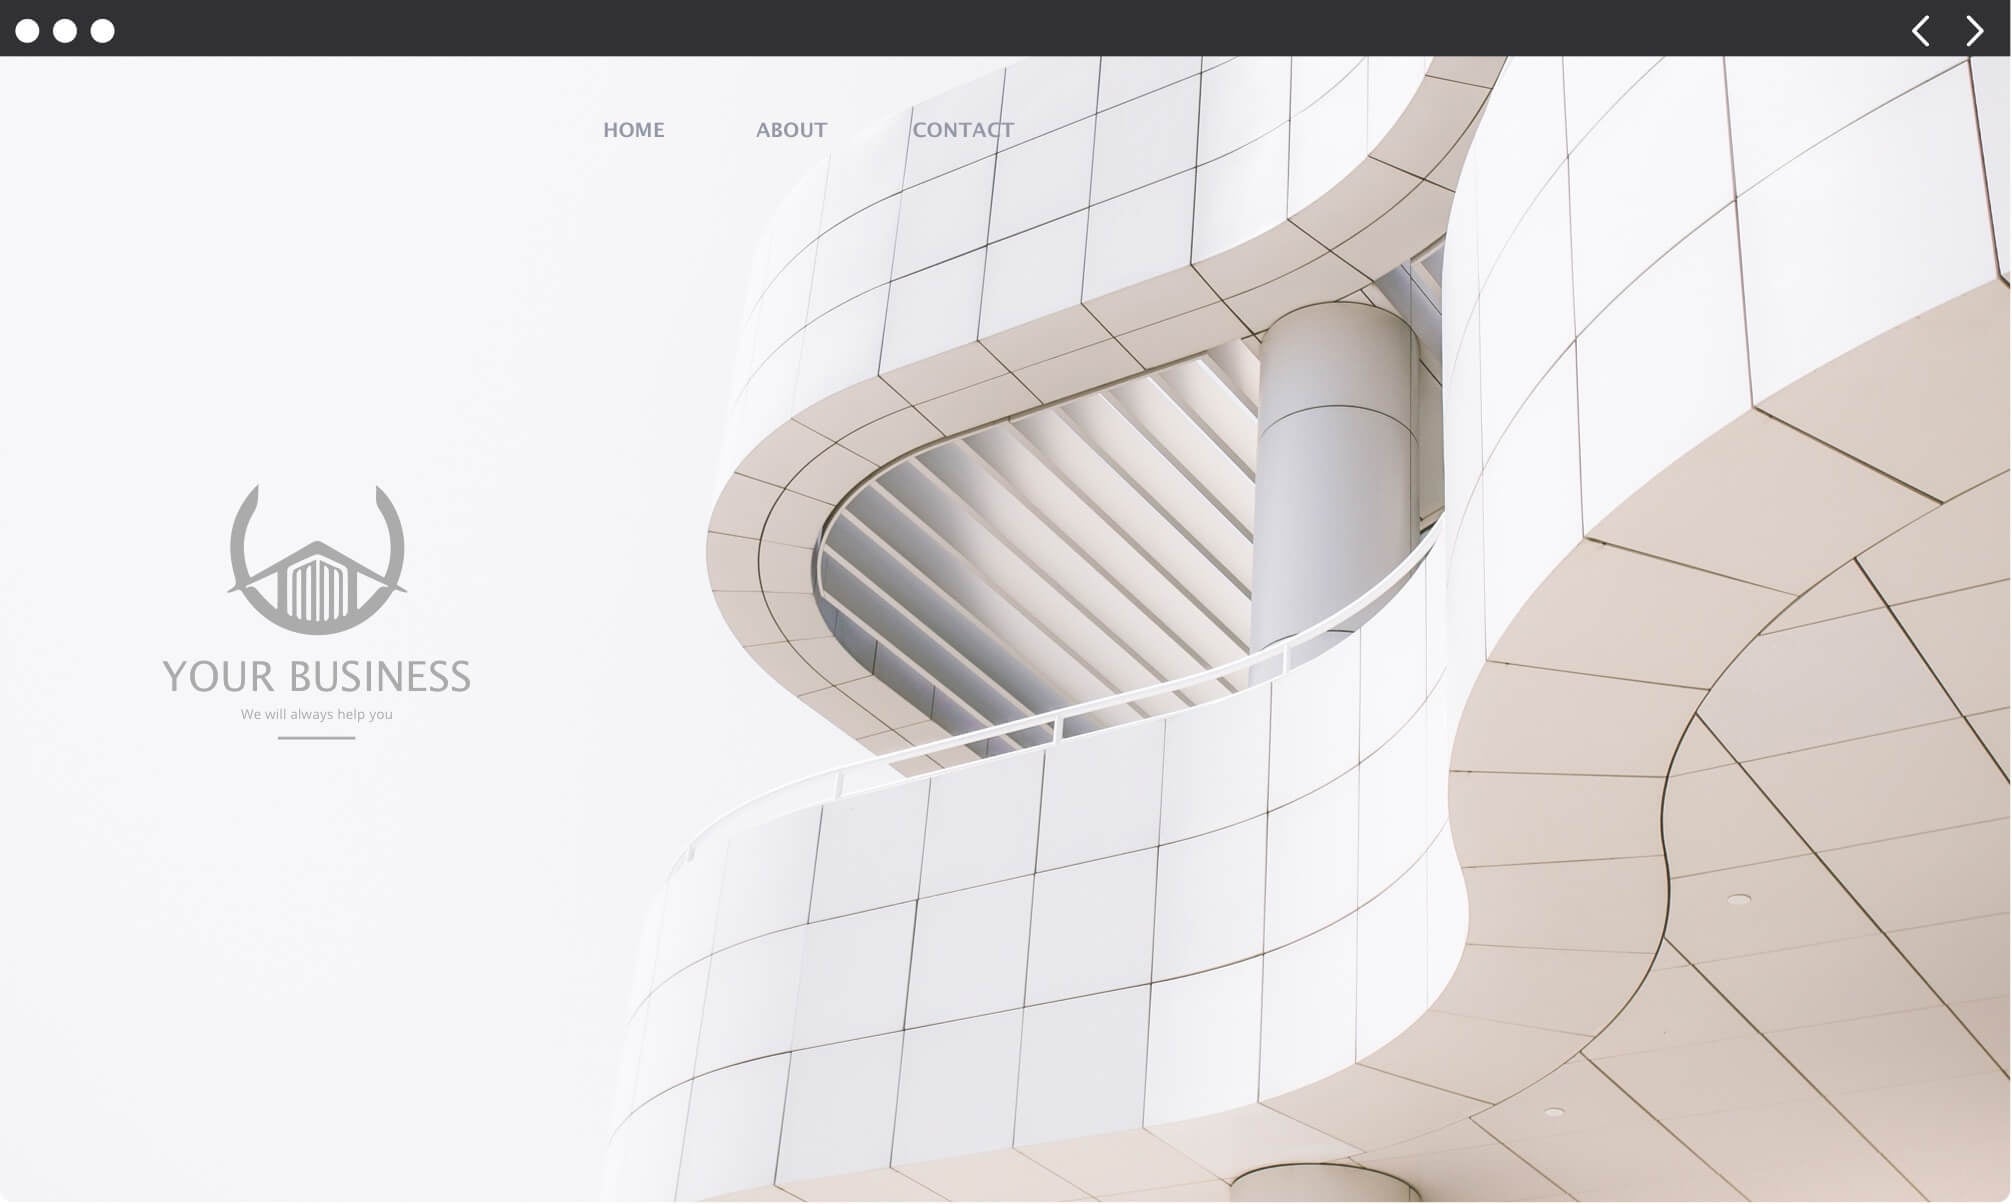 A modern business website homepage built with Jimdo.